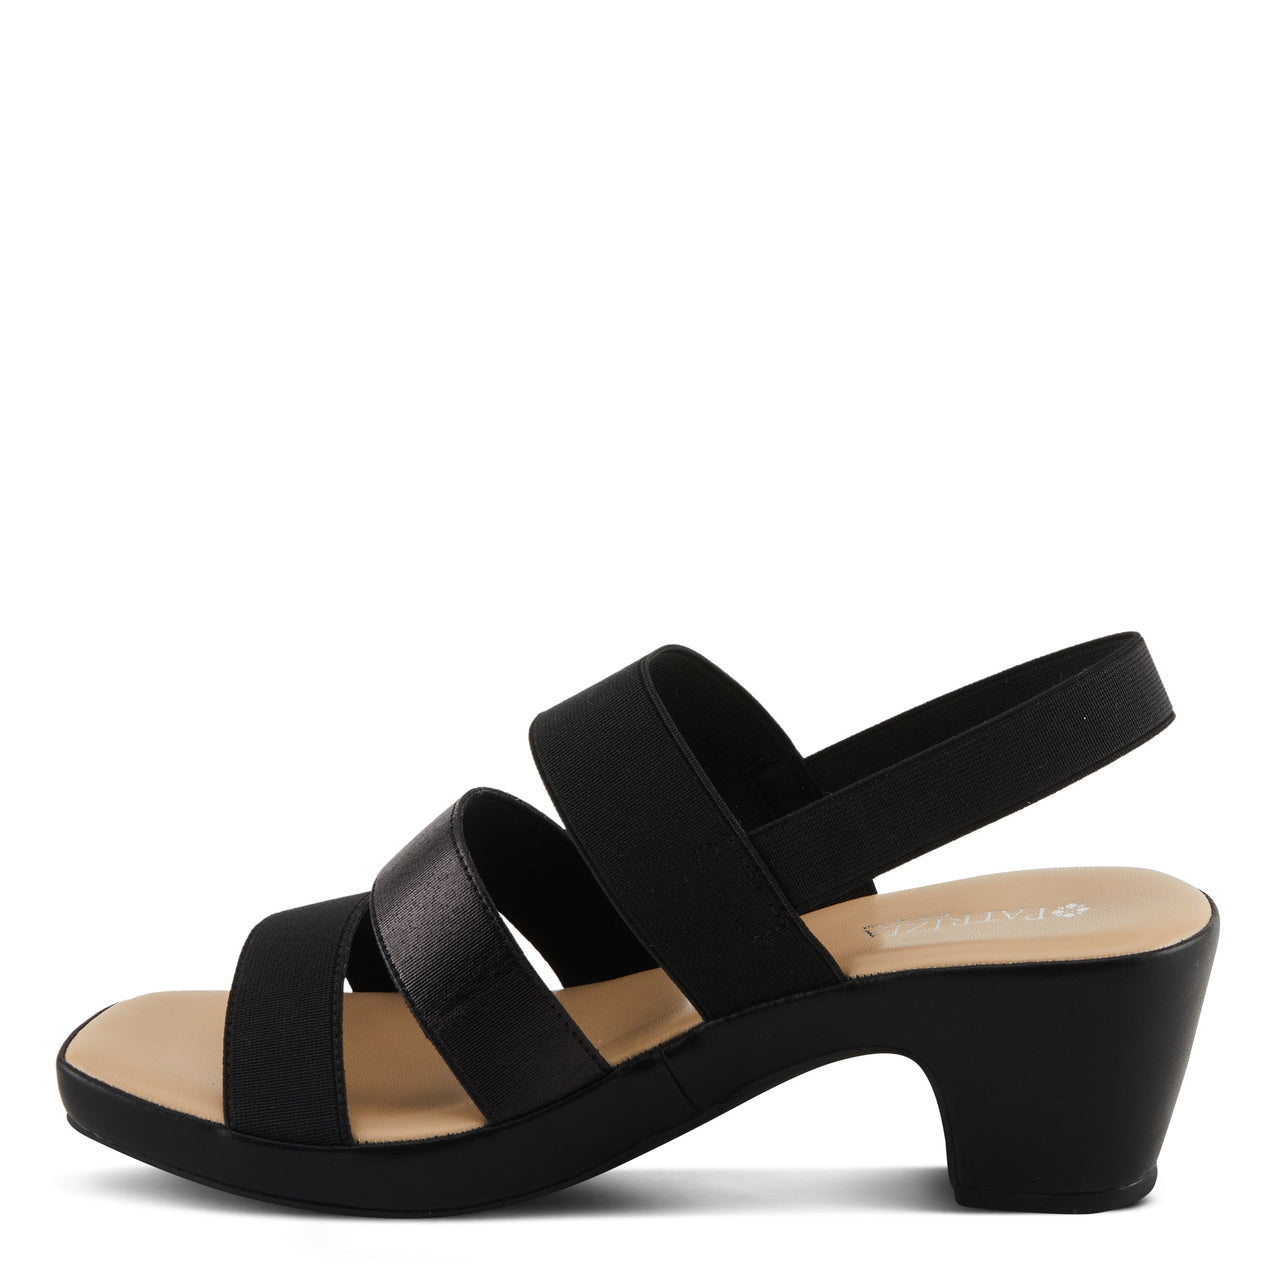 Spring Step Shoes Patrizia Marzula Sandals